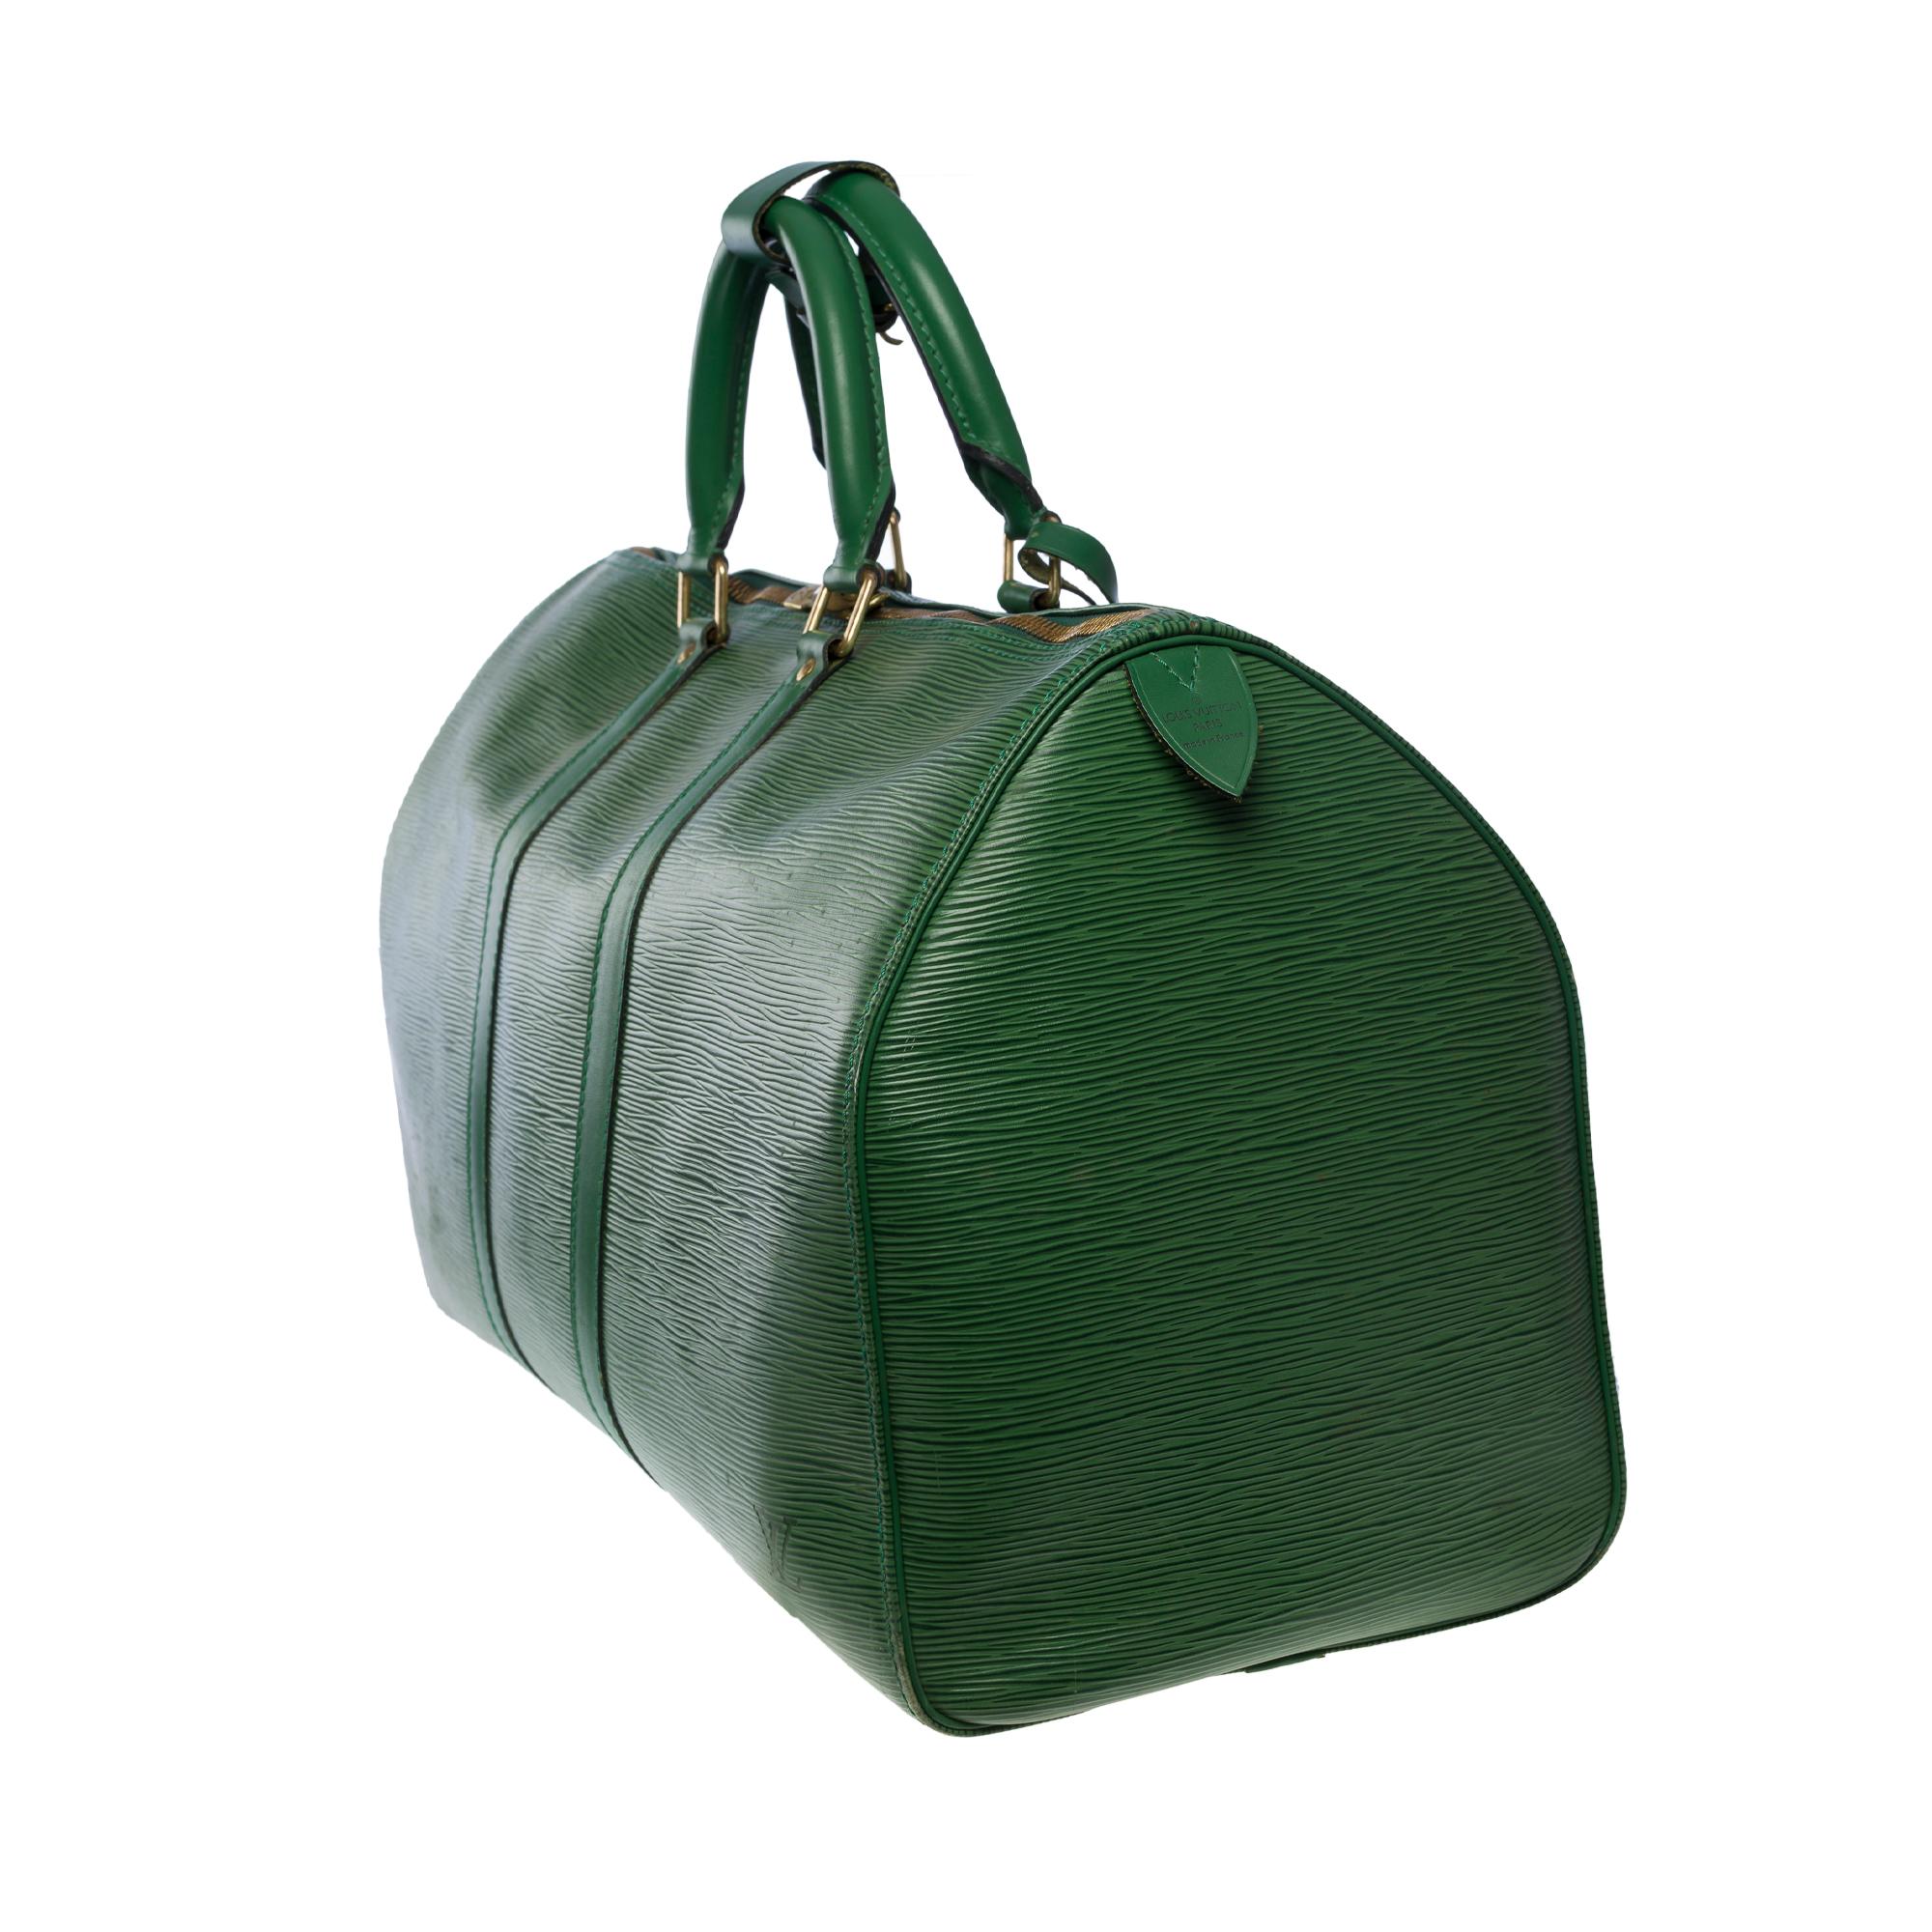 Women's or Men's The very Chic Louis Vuitton Keepall 45 Travel bag in Green epi leather, GHW